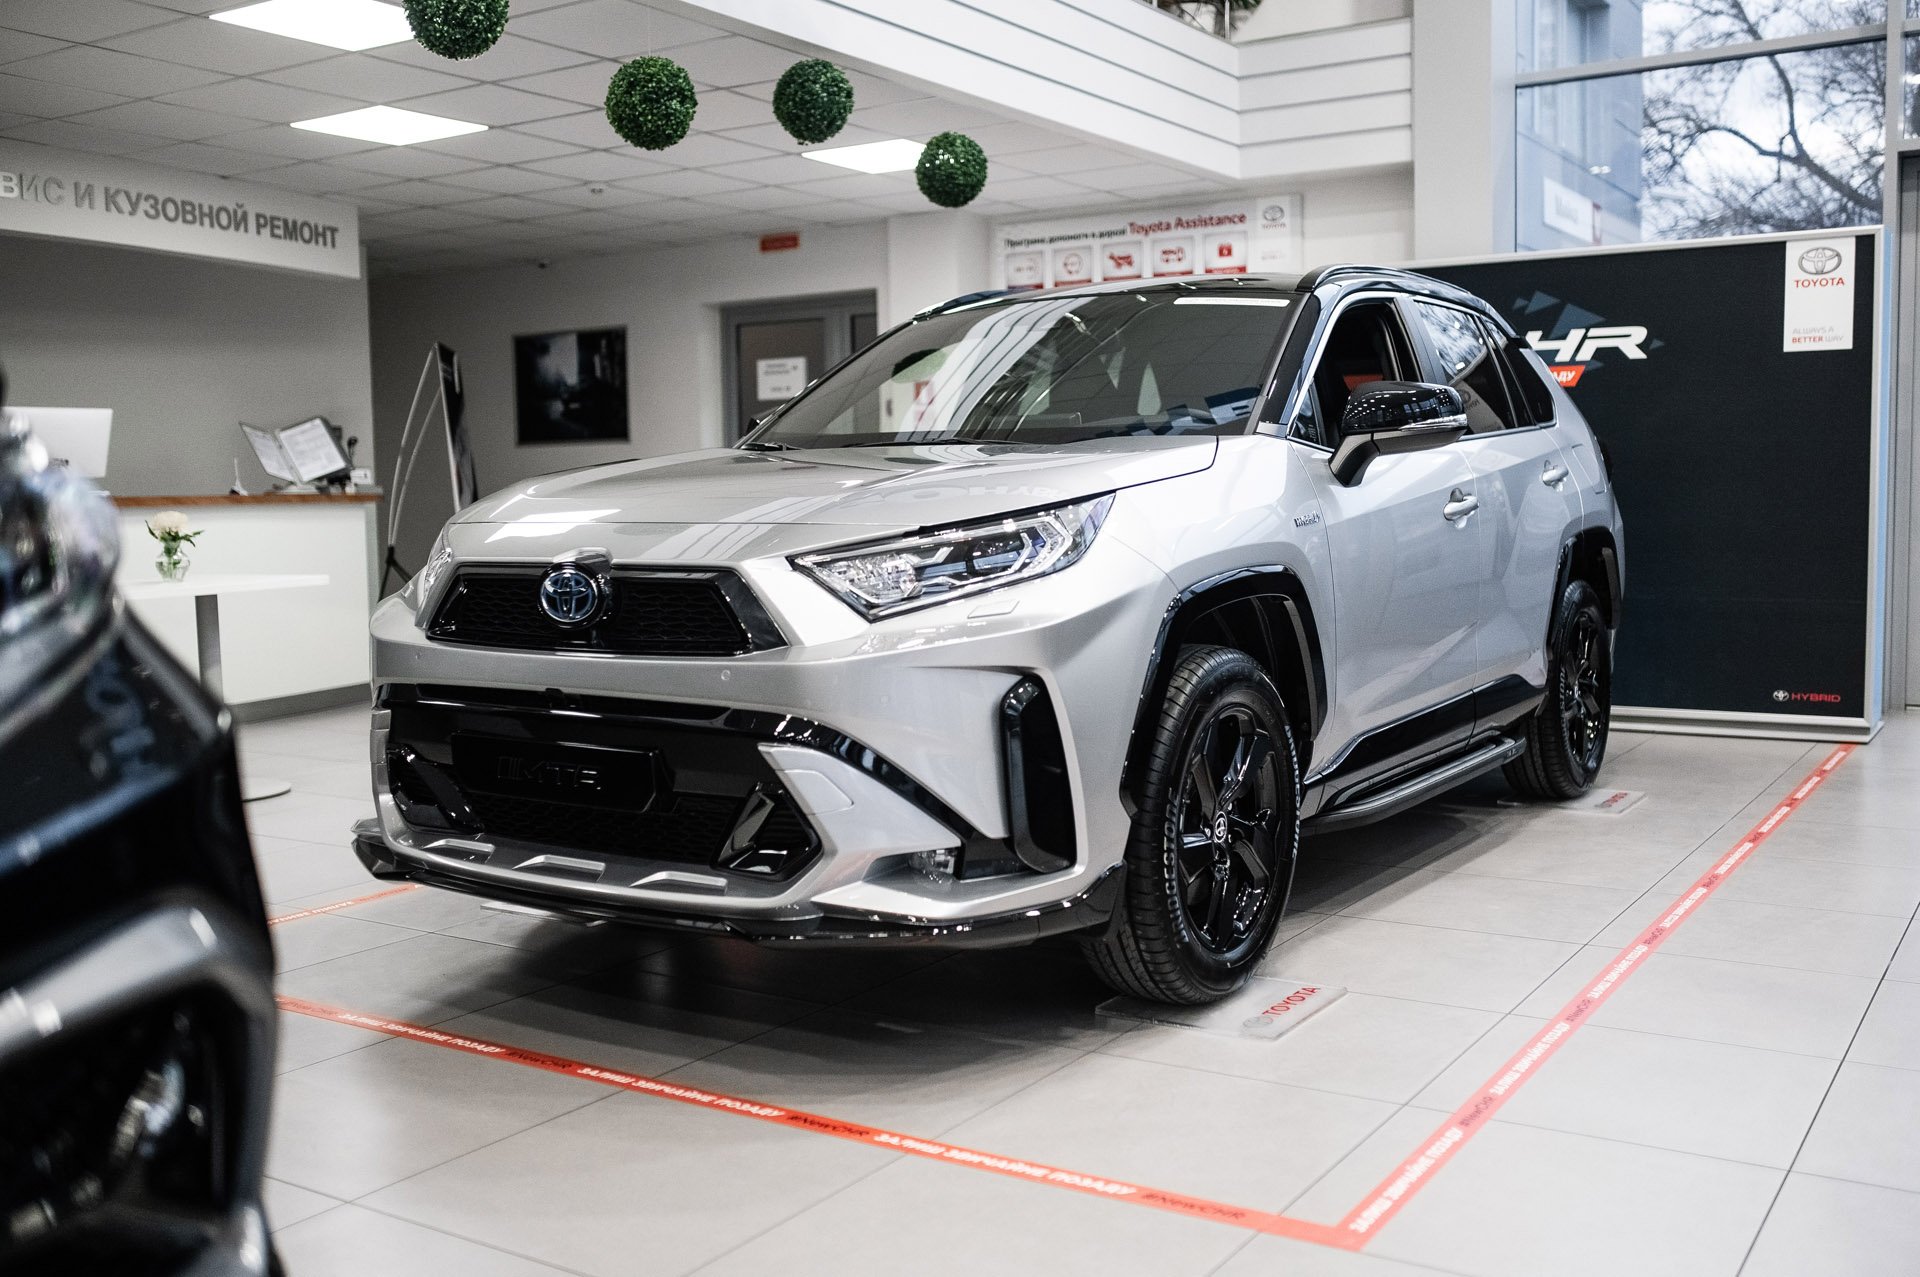 Check our price and buy an MTR Design Body kit for Toyota RAV 4